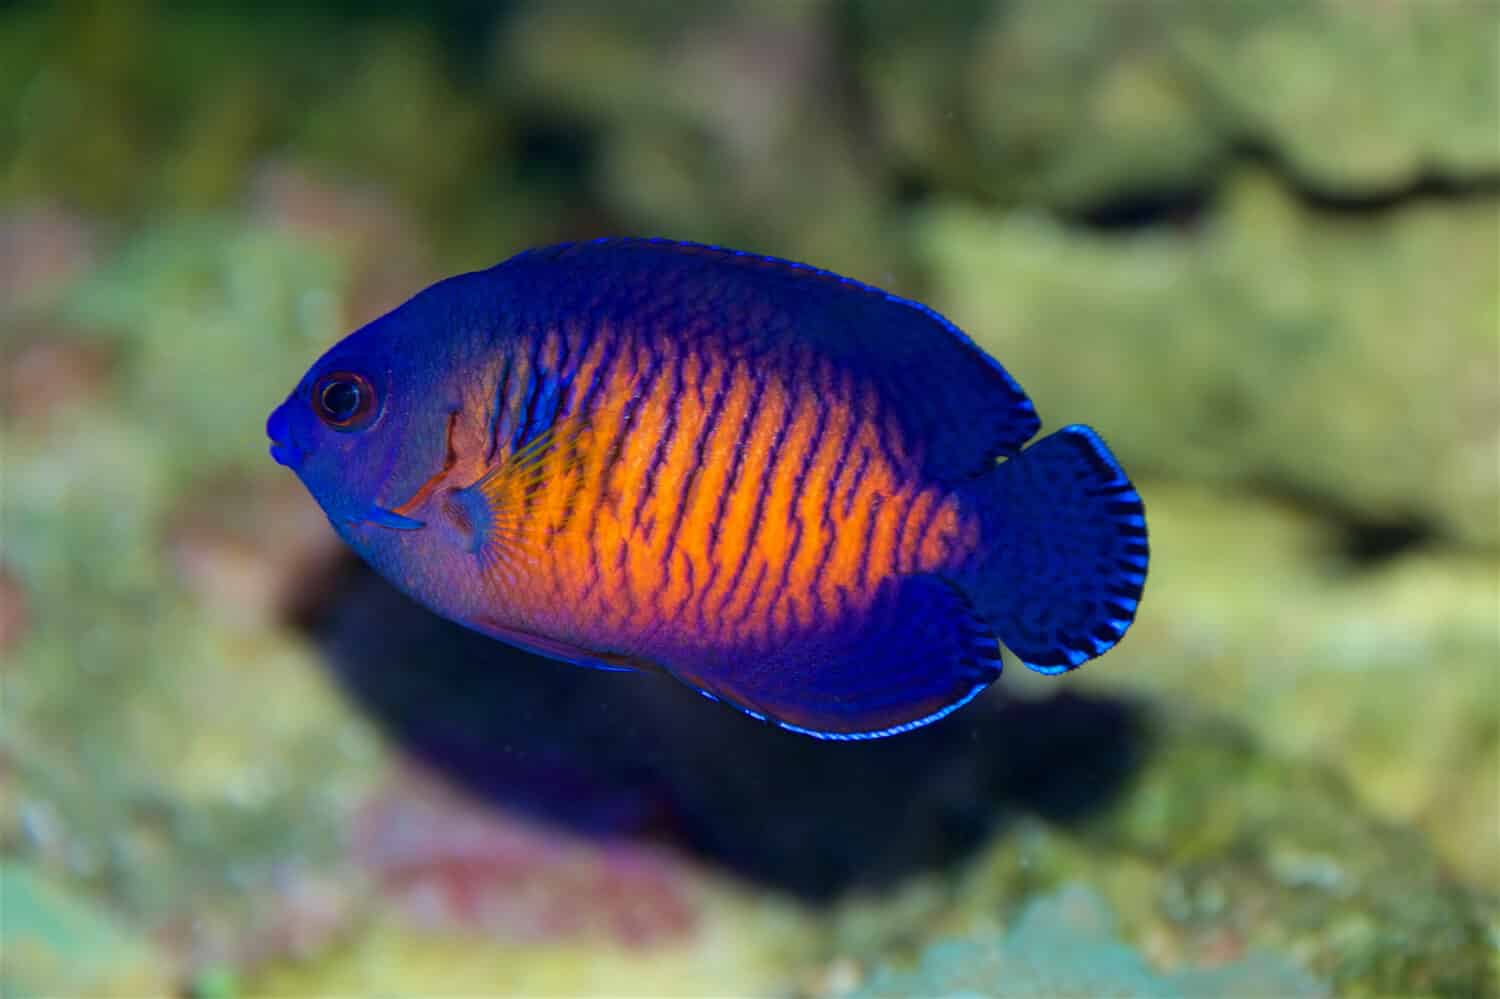 Coral Beauty Angelfish, Centropyge bispinosa, a dwarf or pygmy angelfish from the Indo Pacific